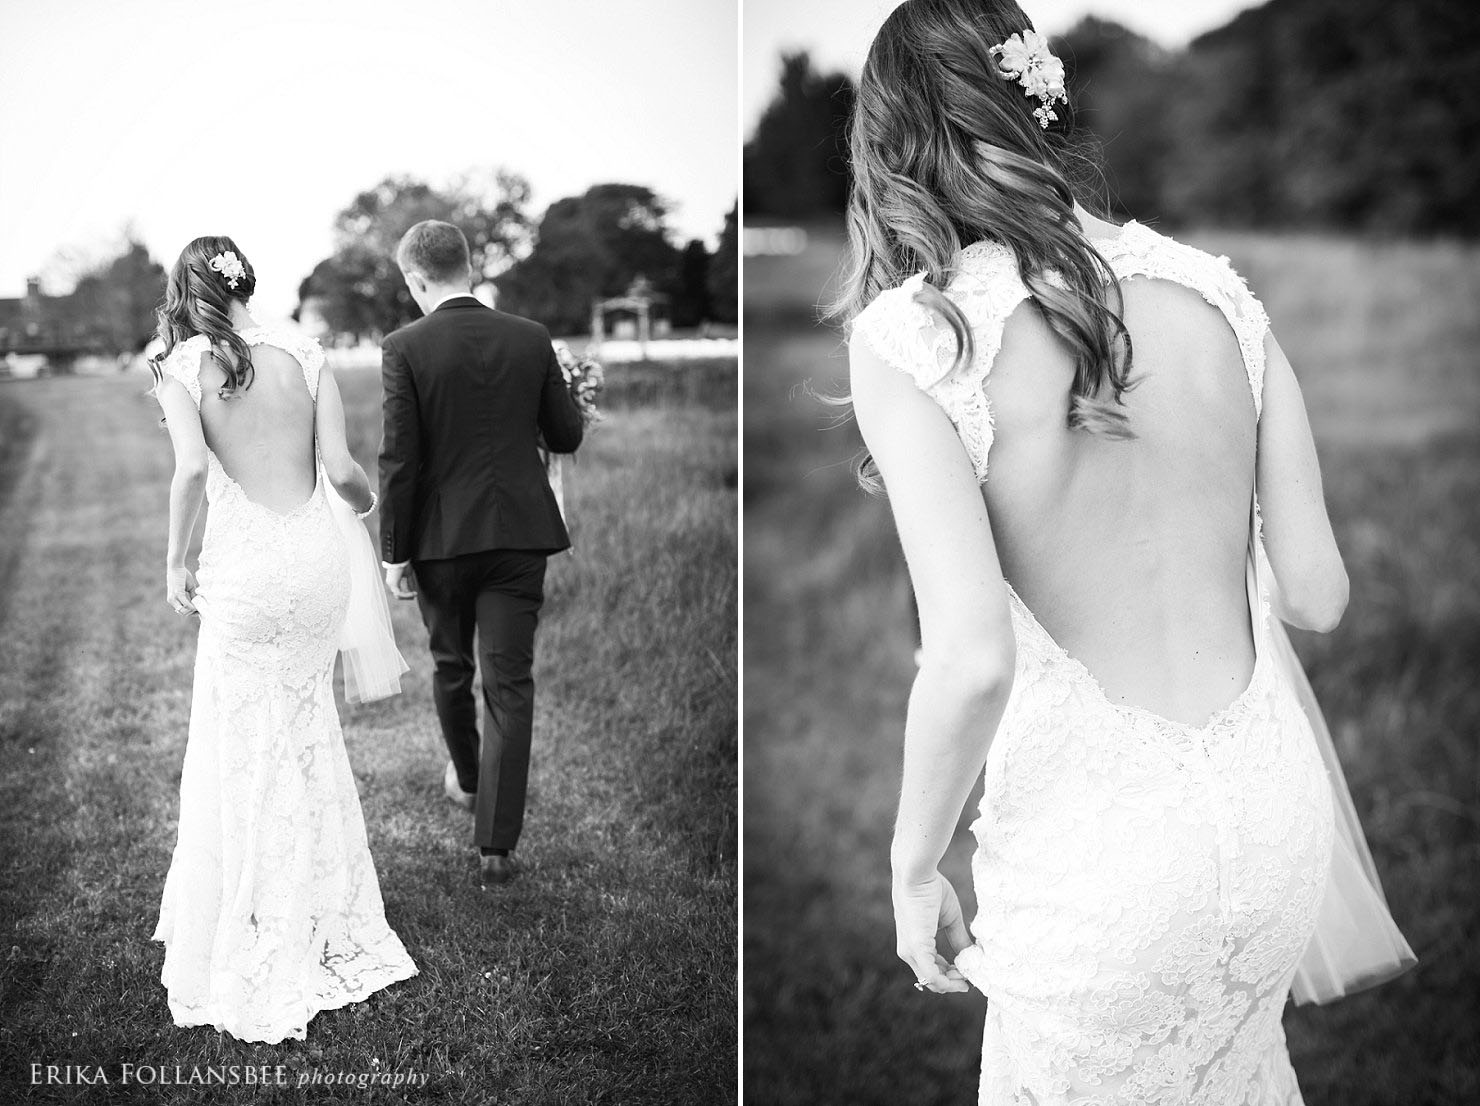 New Hampshire wedding | Bride and Groom in a field